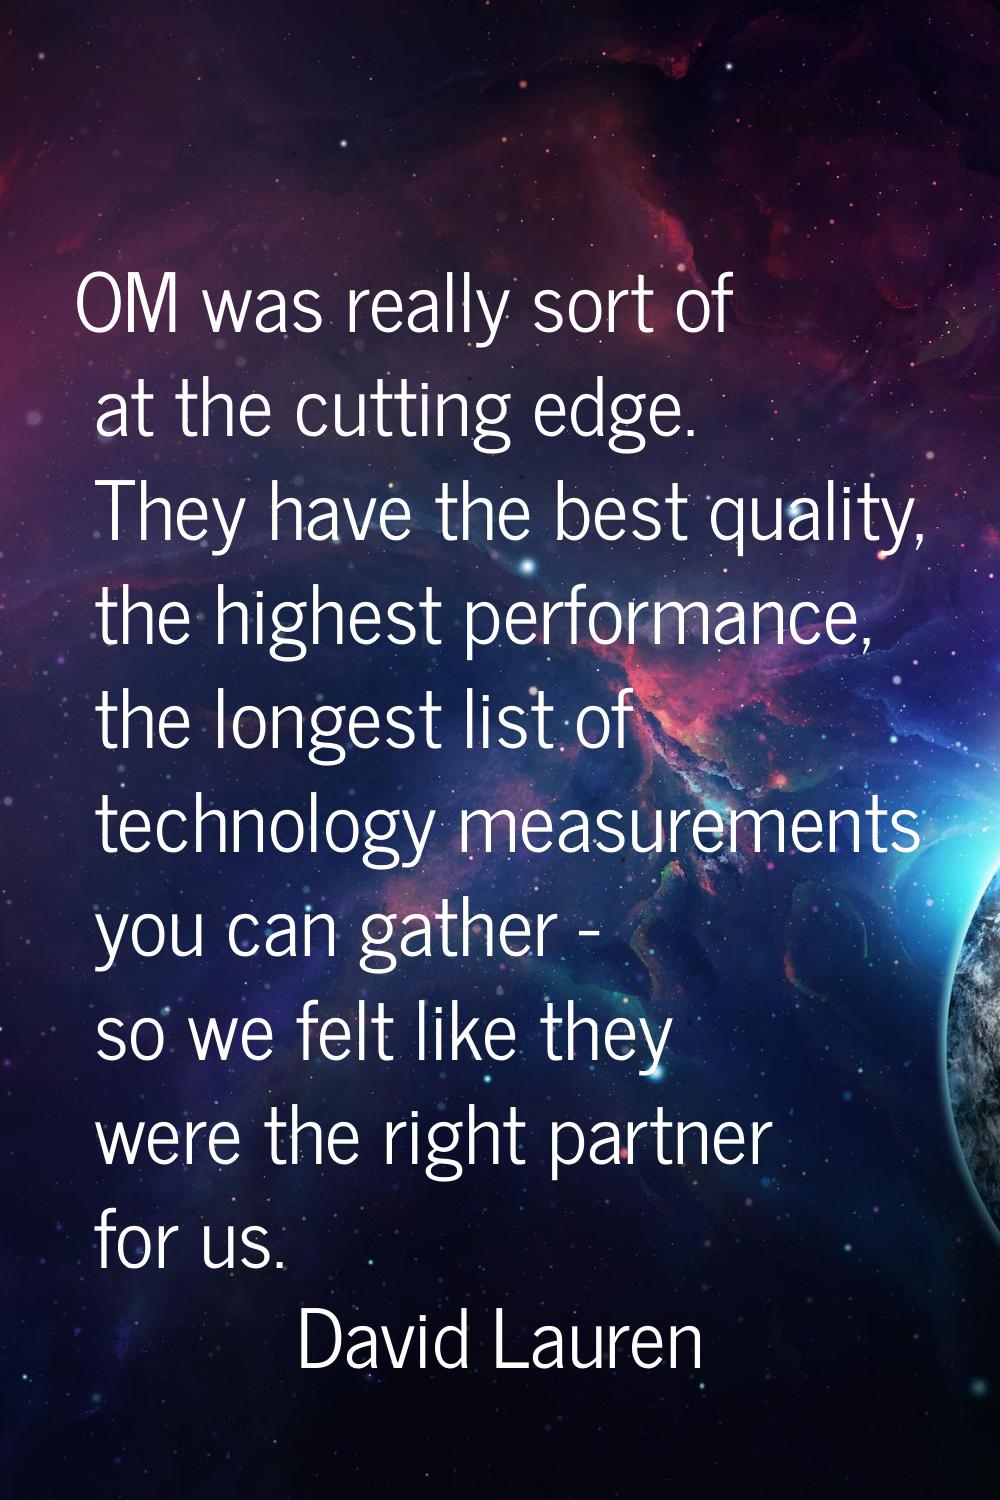 OM was really sort of at the cutting edge. They have the best quality, the highest performance, the